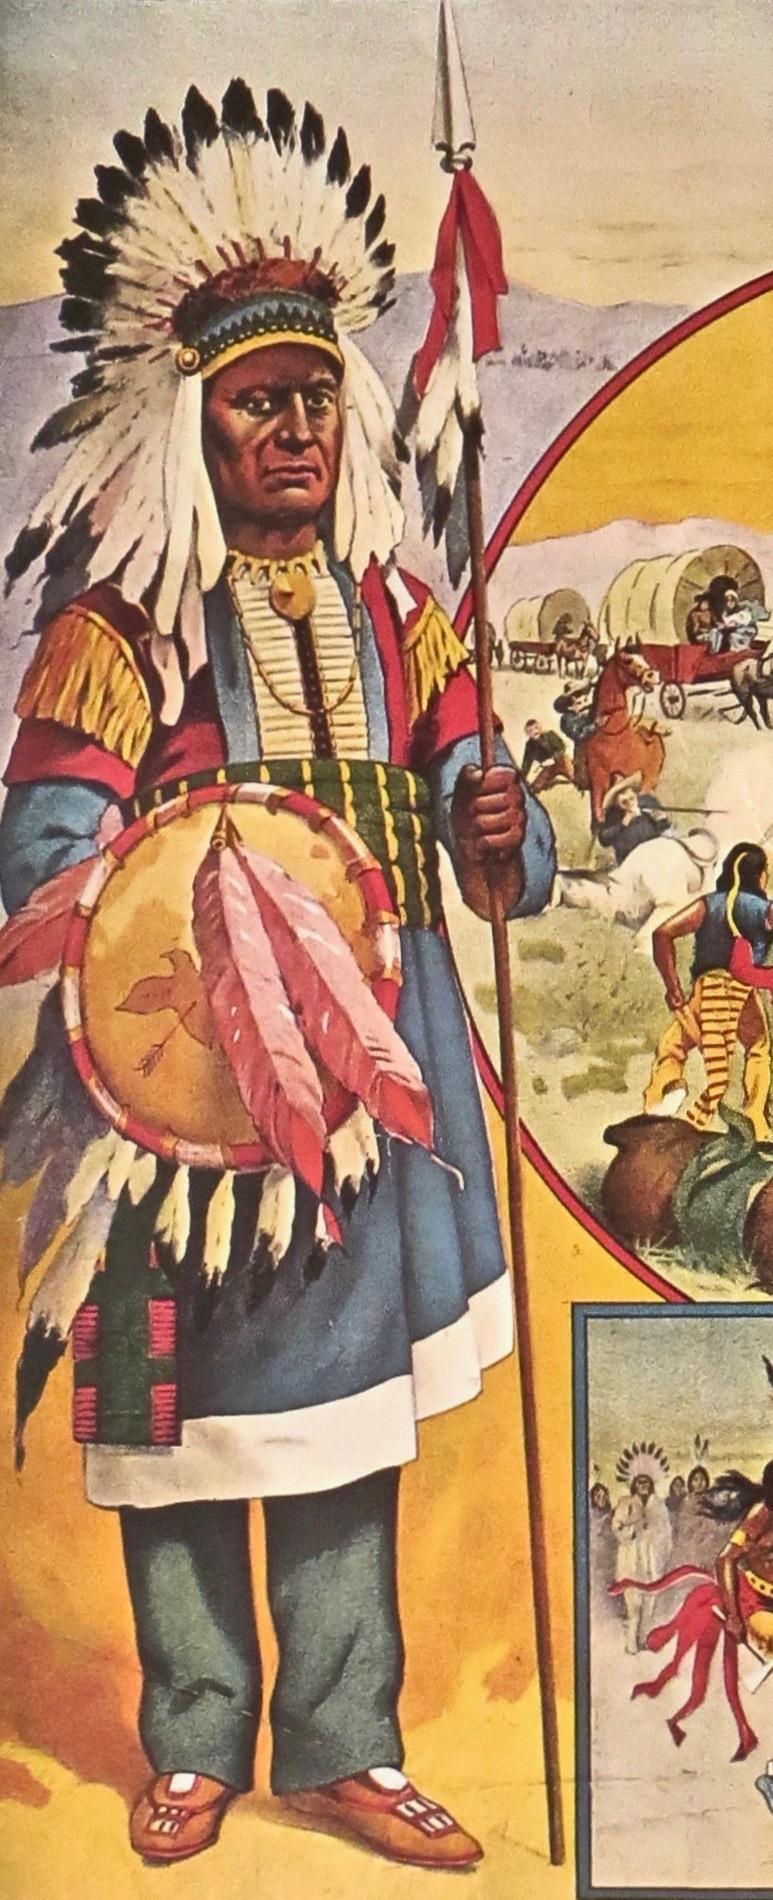 This bright and colorful, action packed circus poster portrays the quintessential Buffalo Bill images with Indians and western scenes, characters in full regalia that were used in his wild west shows and Barnum and Bailey circus events, with whom he